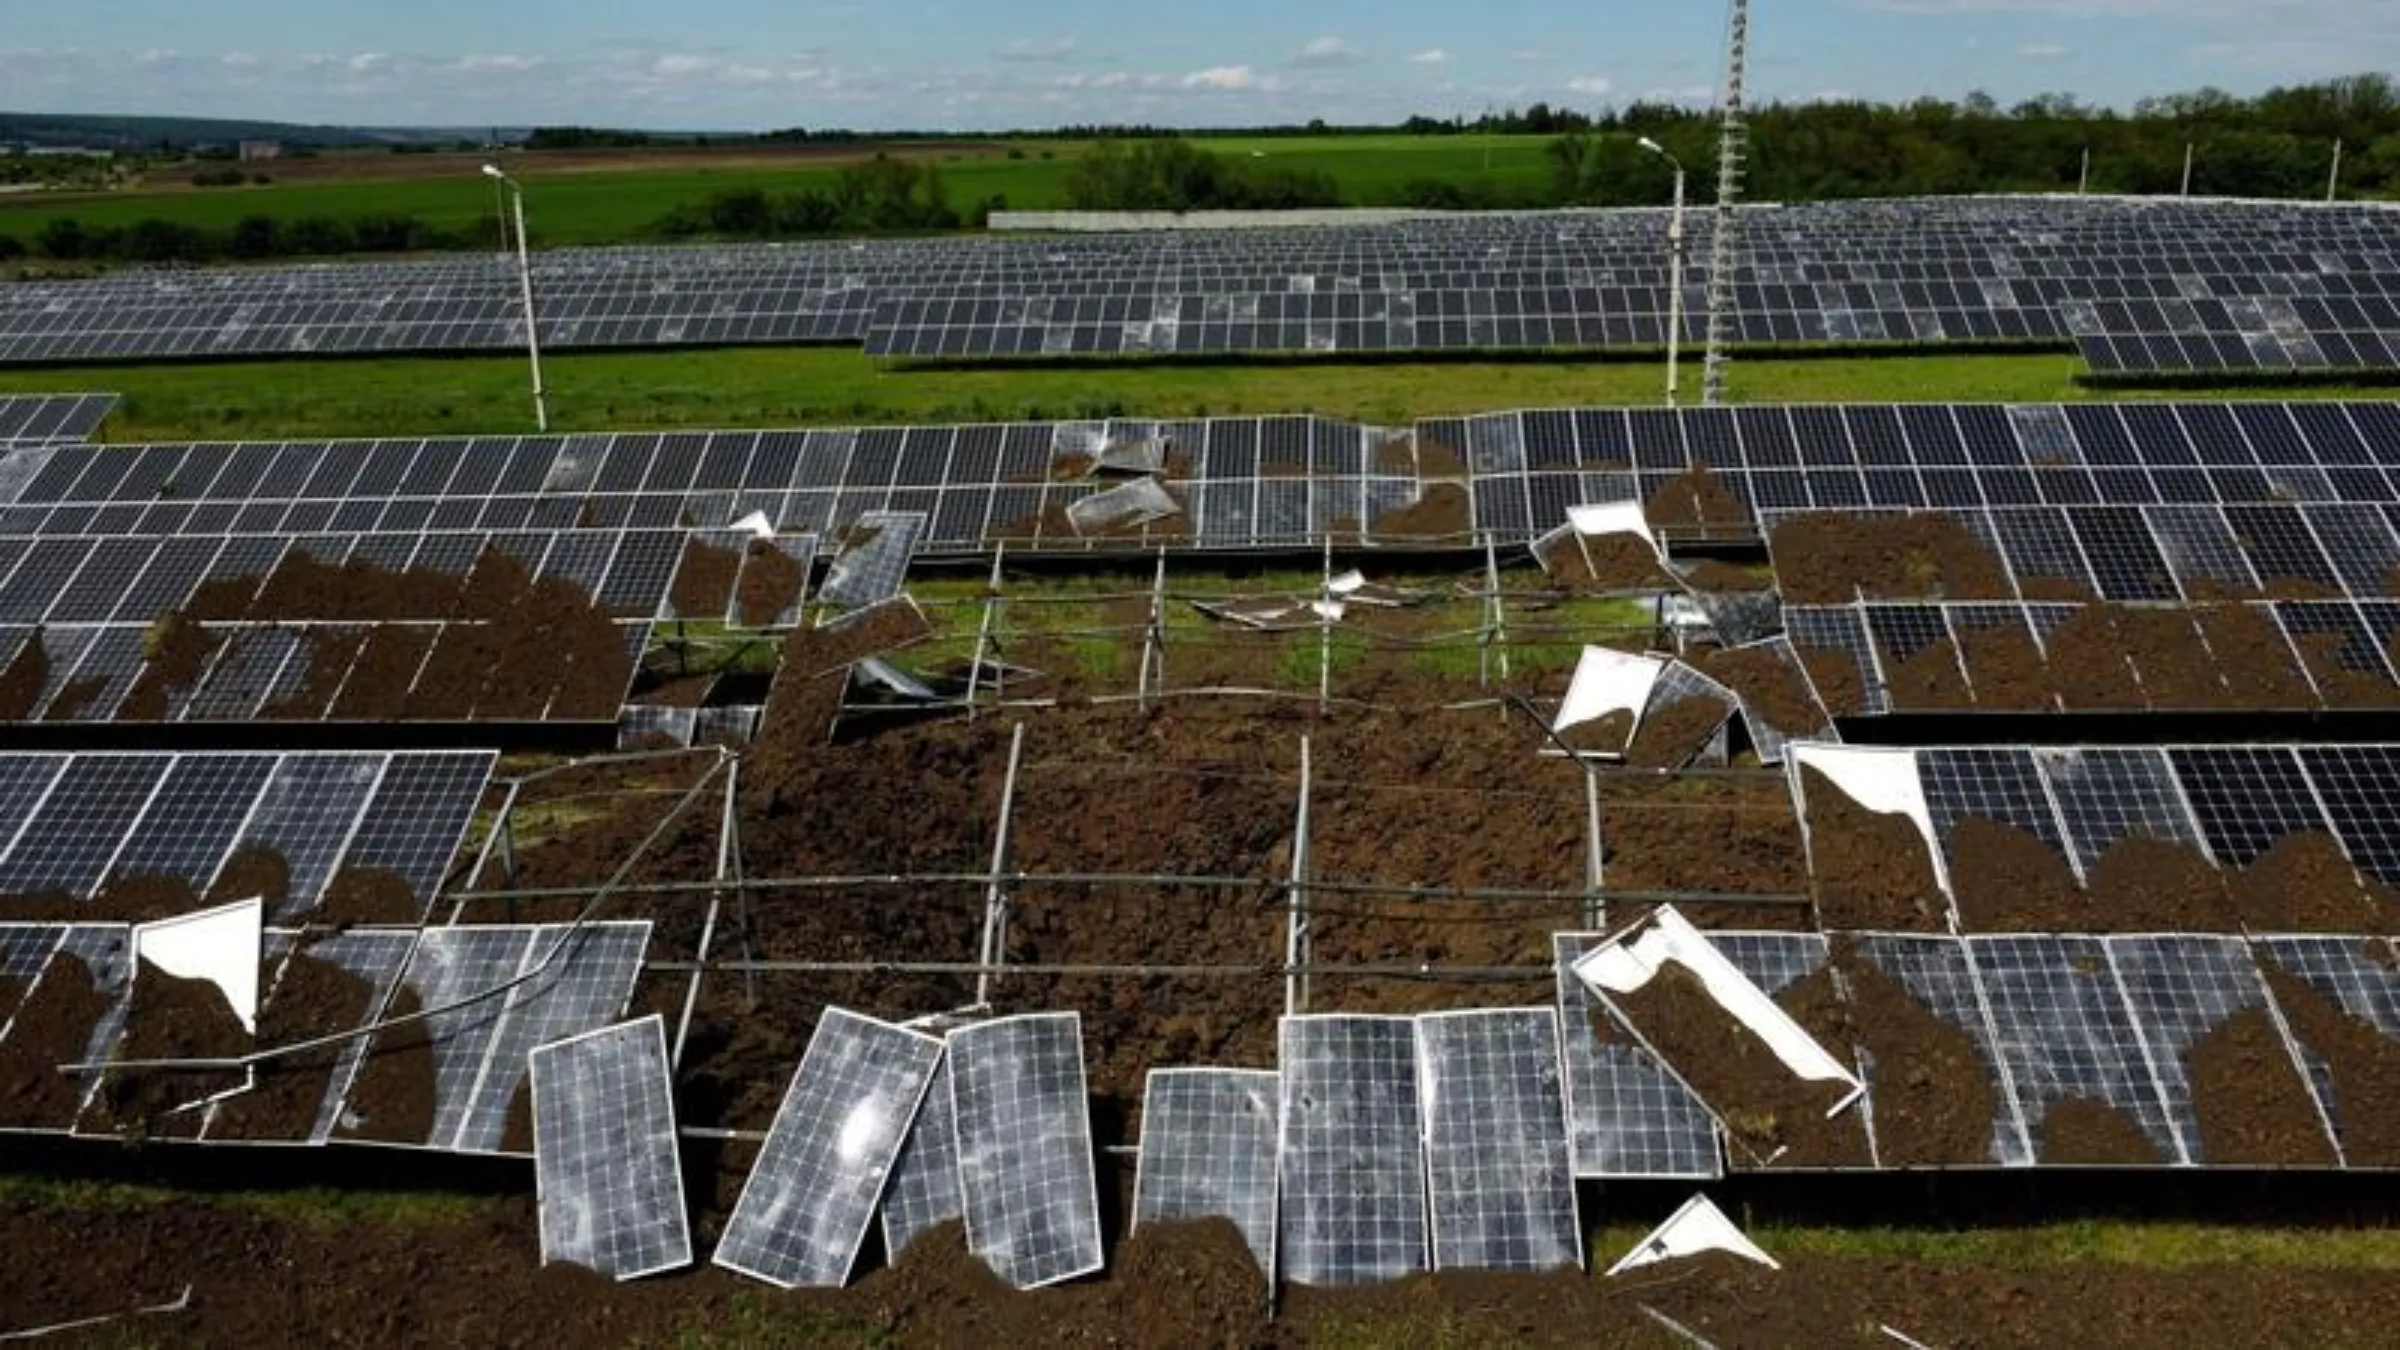 Solar panels damaged in shelling are seen at a power station that was producing 2.5 megawatts of power, amid Russia's attack on Ukraine, in the town of Merefa on the outskirts of Kharkiv, Ukraine May 28, 2022. Picture taken with a drone. REUTERS/Ivan Alvarado